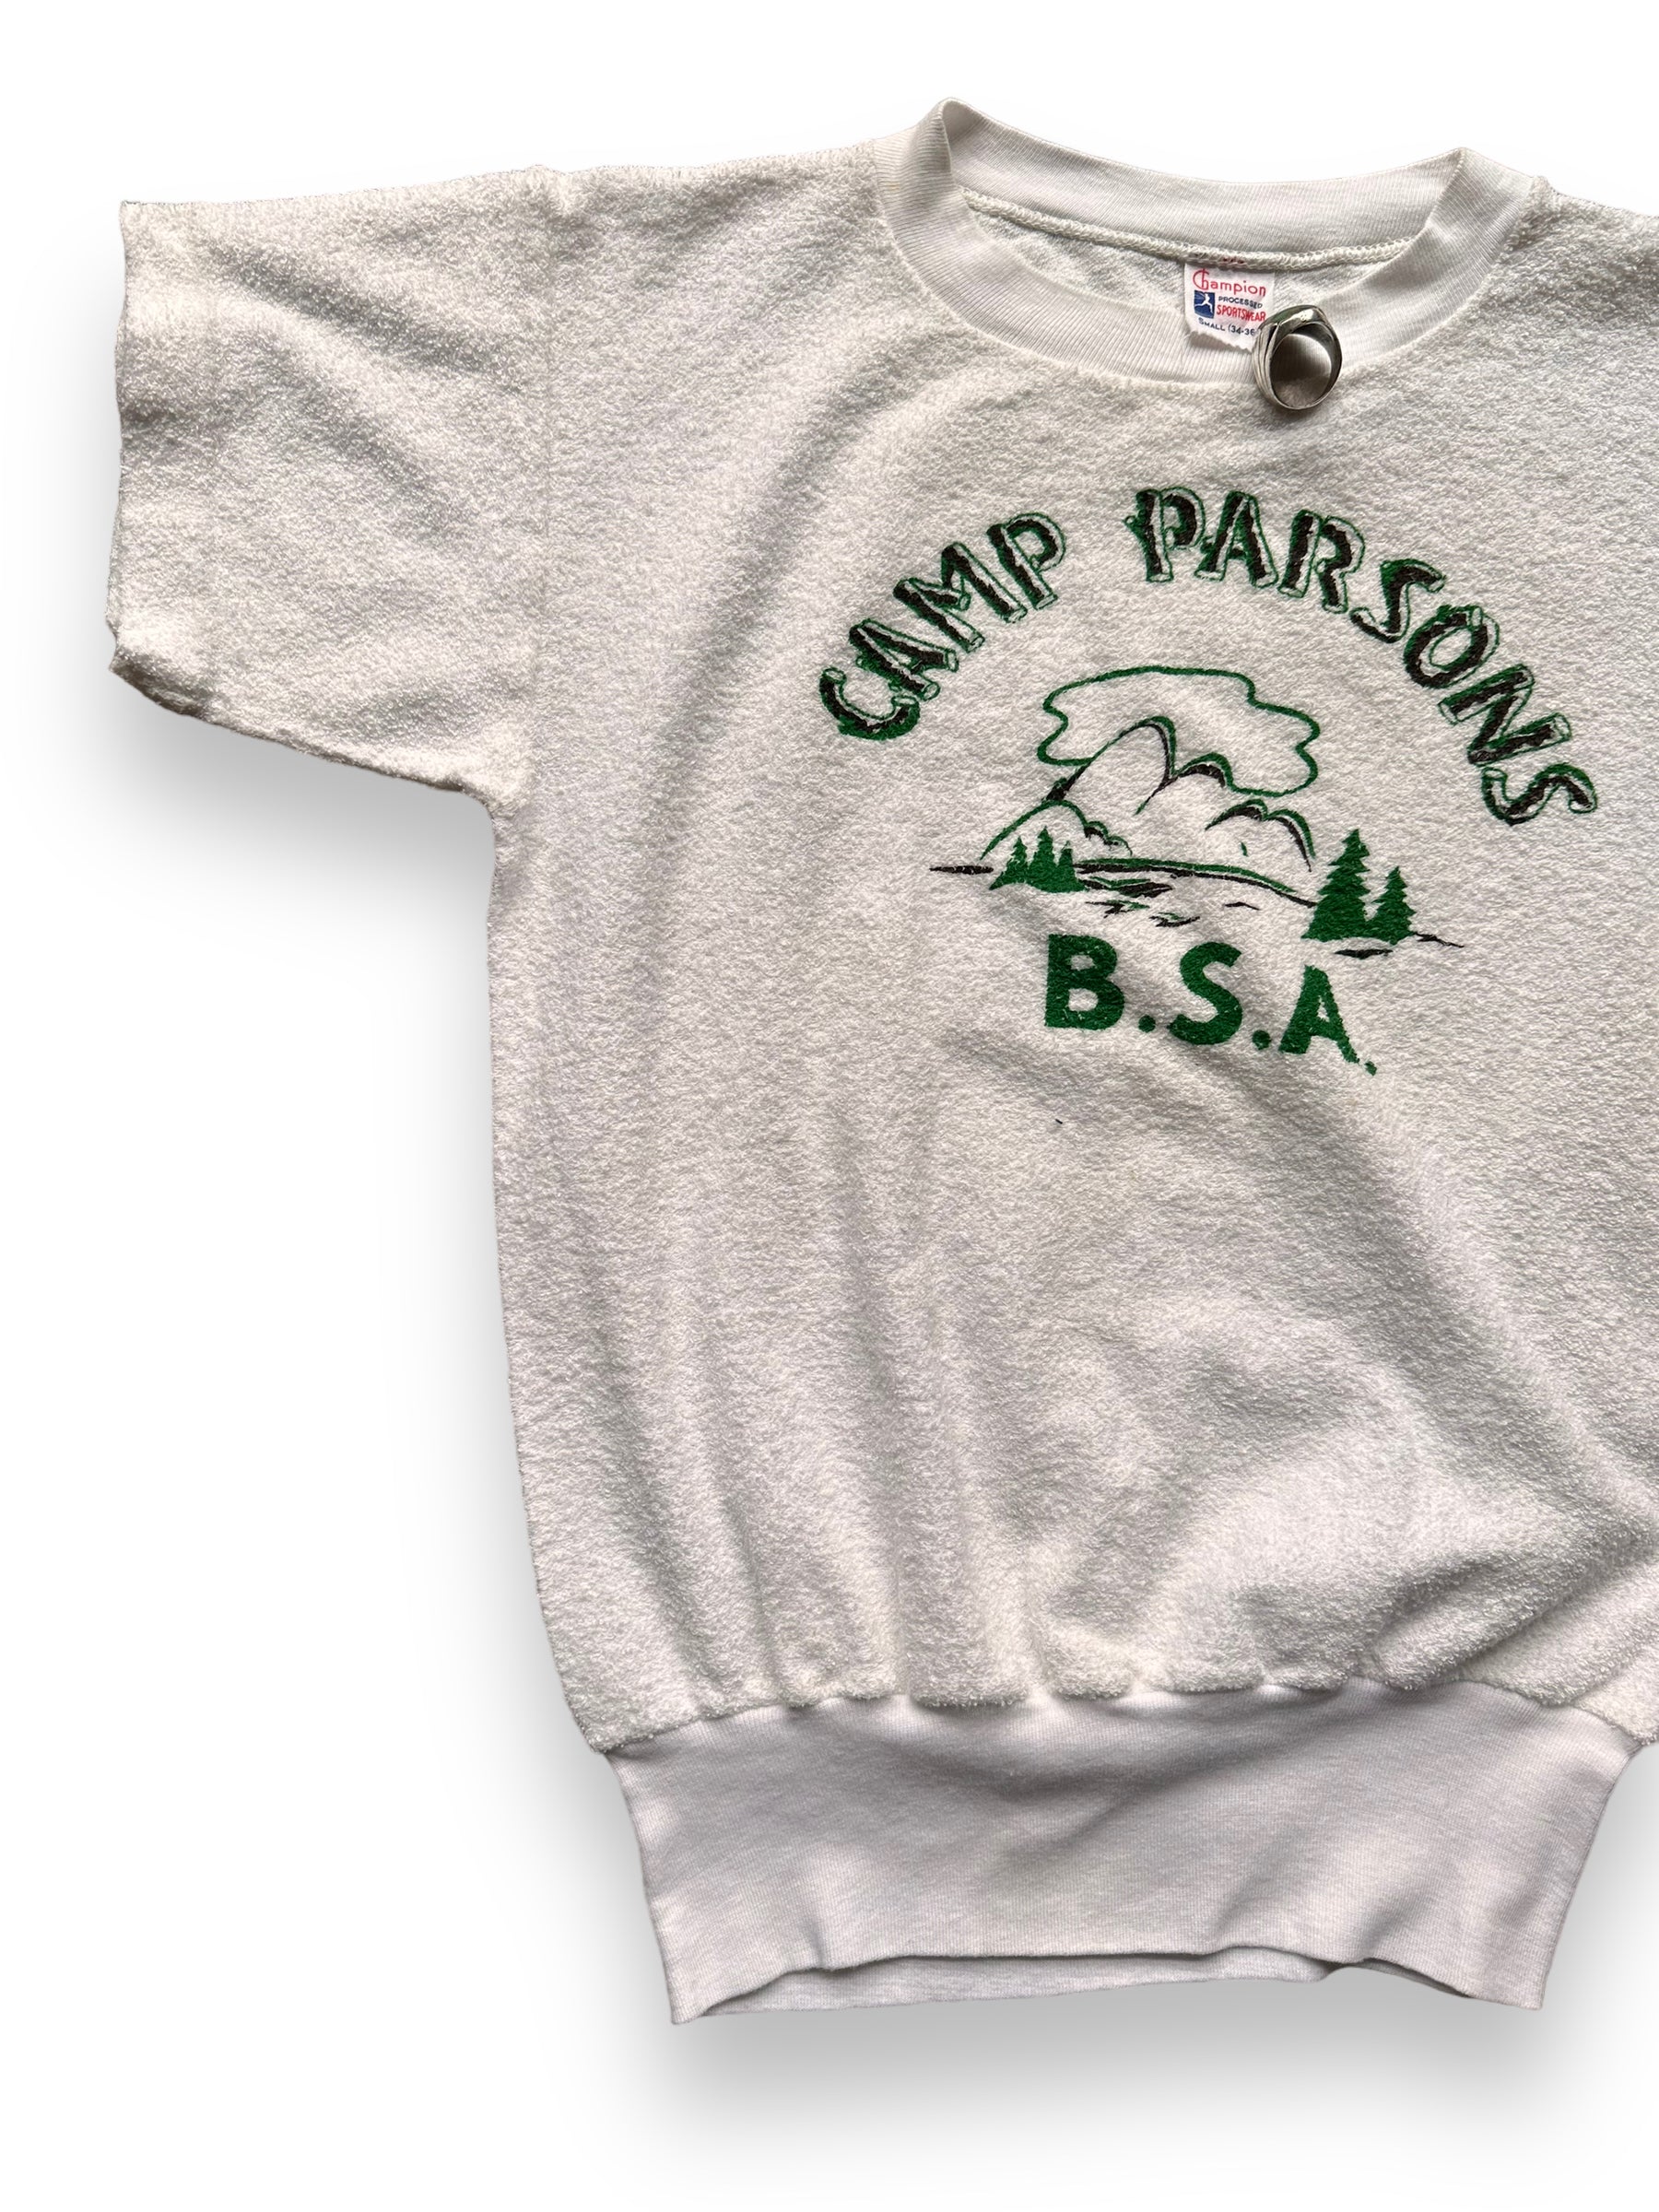 Front Right View of Vintage Champion Camp Parsons BSA Camp Terry Cloth Shirt SZ SM | Vintage Boy Scout Camp Shirt | Seattle Vintage Clothing